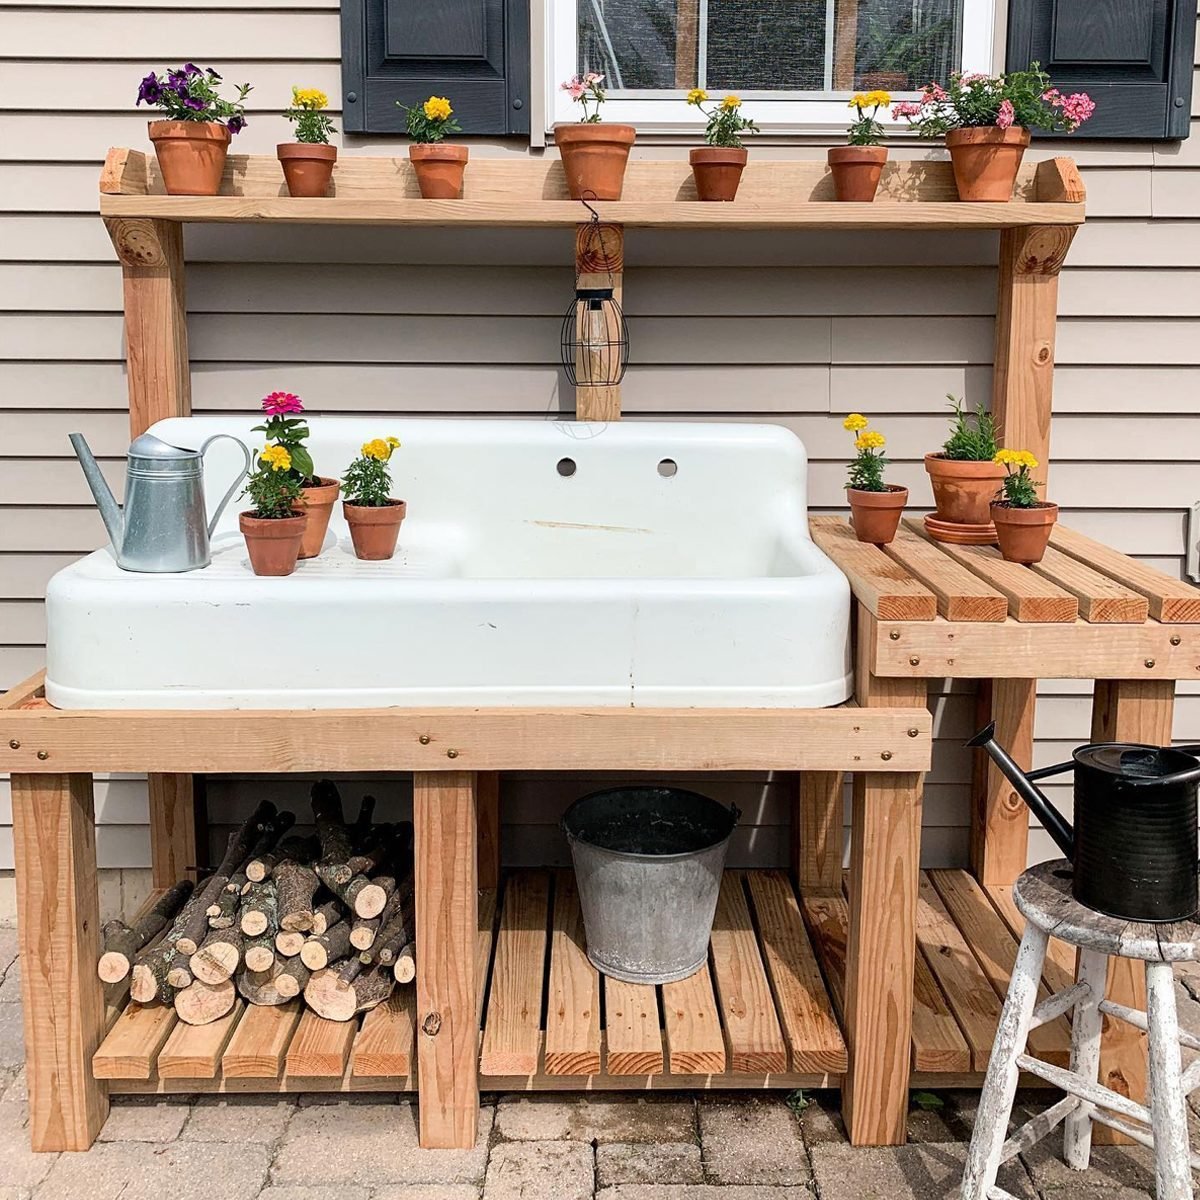 Why We Created the Quick-n-Easy Outdoor Sink Cover We Did!